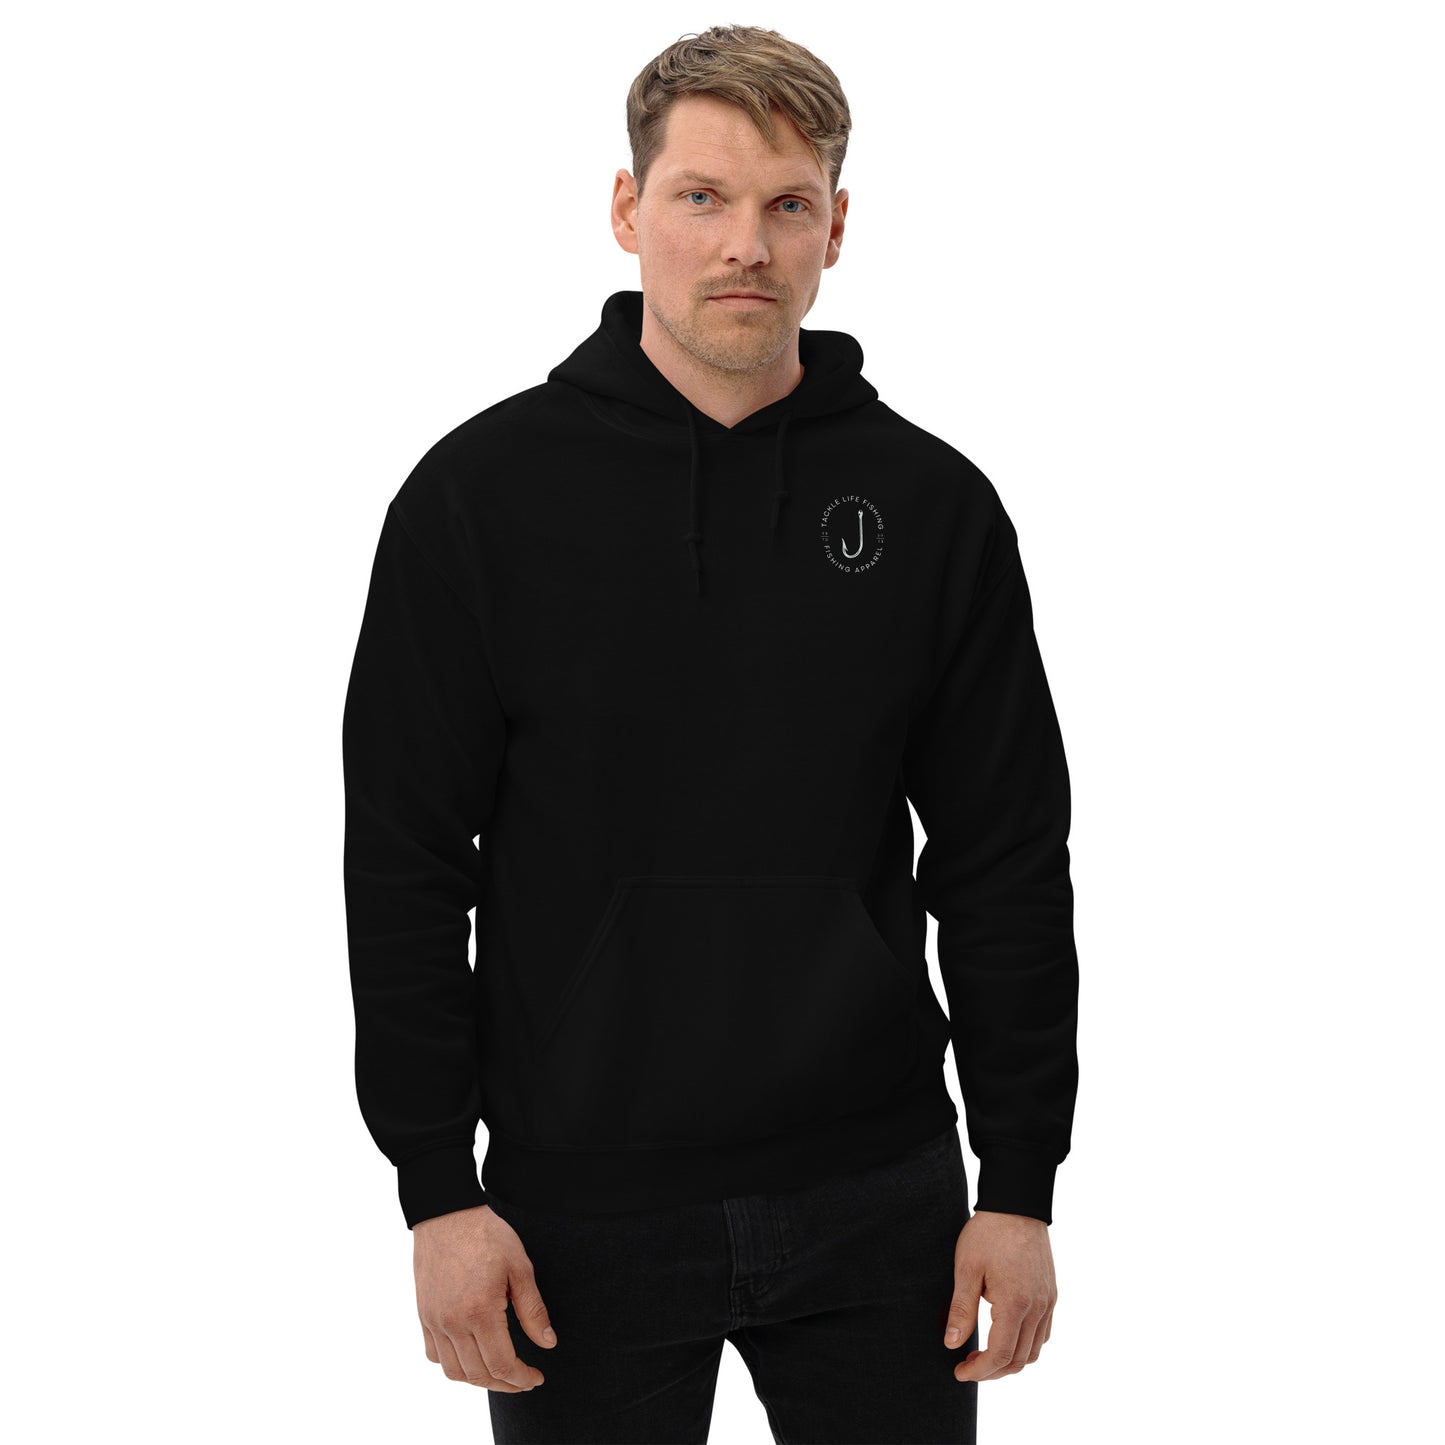 TLF Dirstressed Flag Pirate Logo Unisex Hoodie -- Gray Chest Logo and Back Design on Black